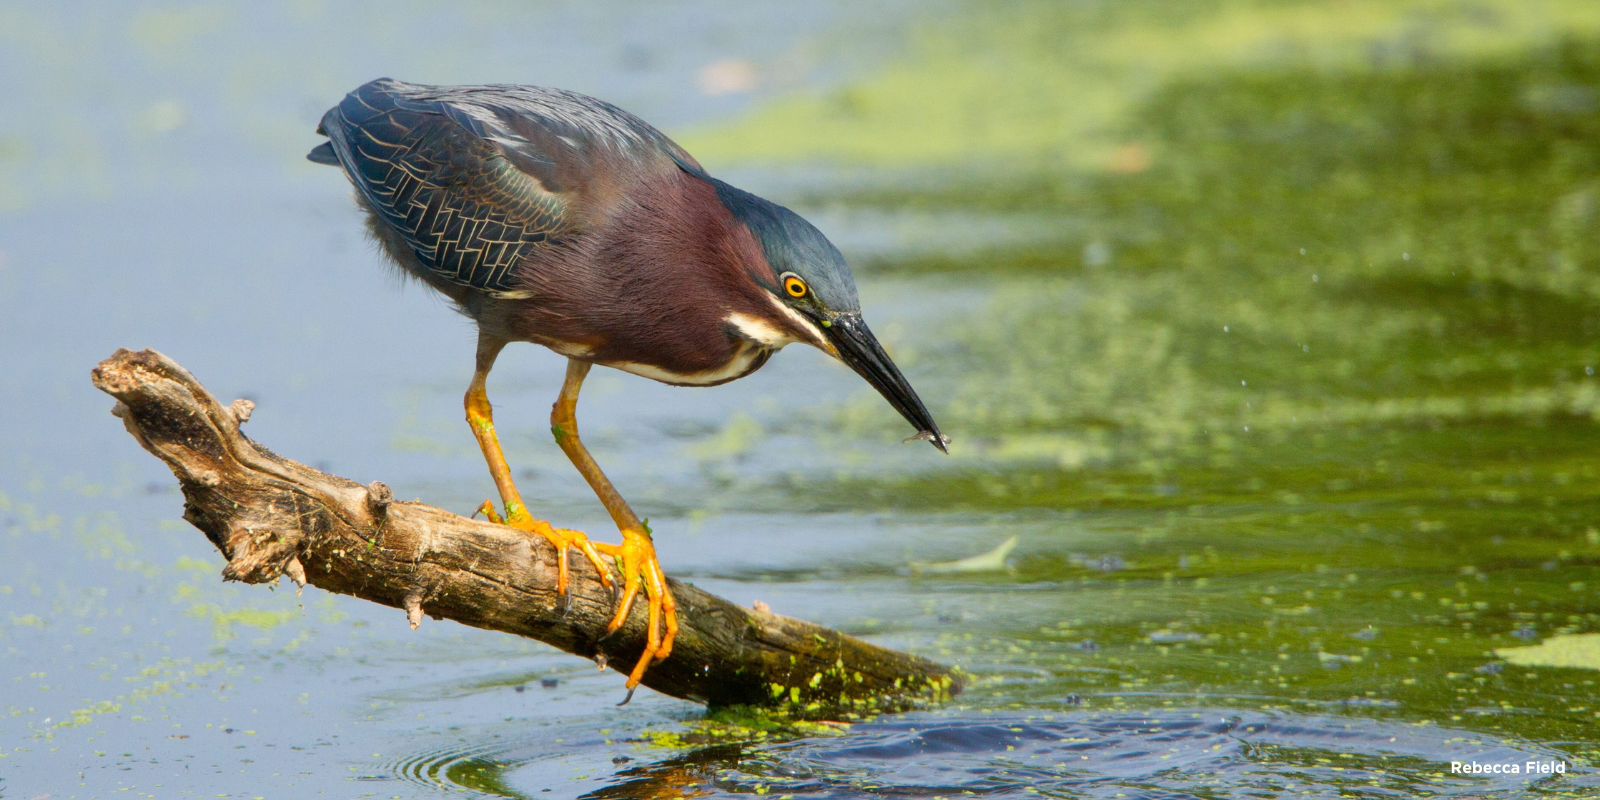 A bittern (bird) perches on a piece of wood in a lake hunting